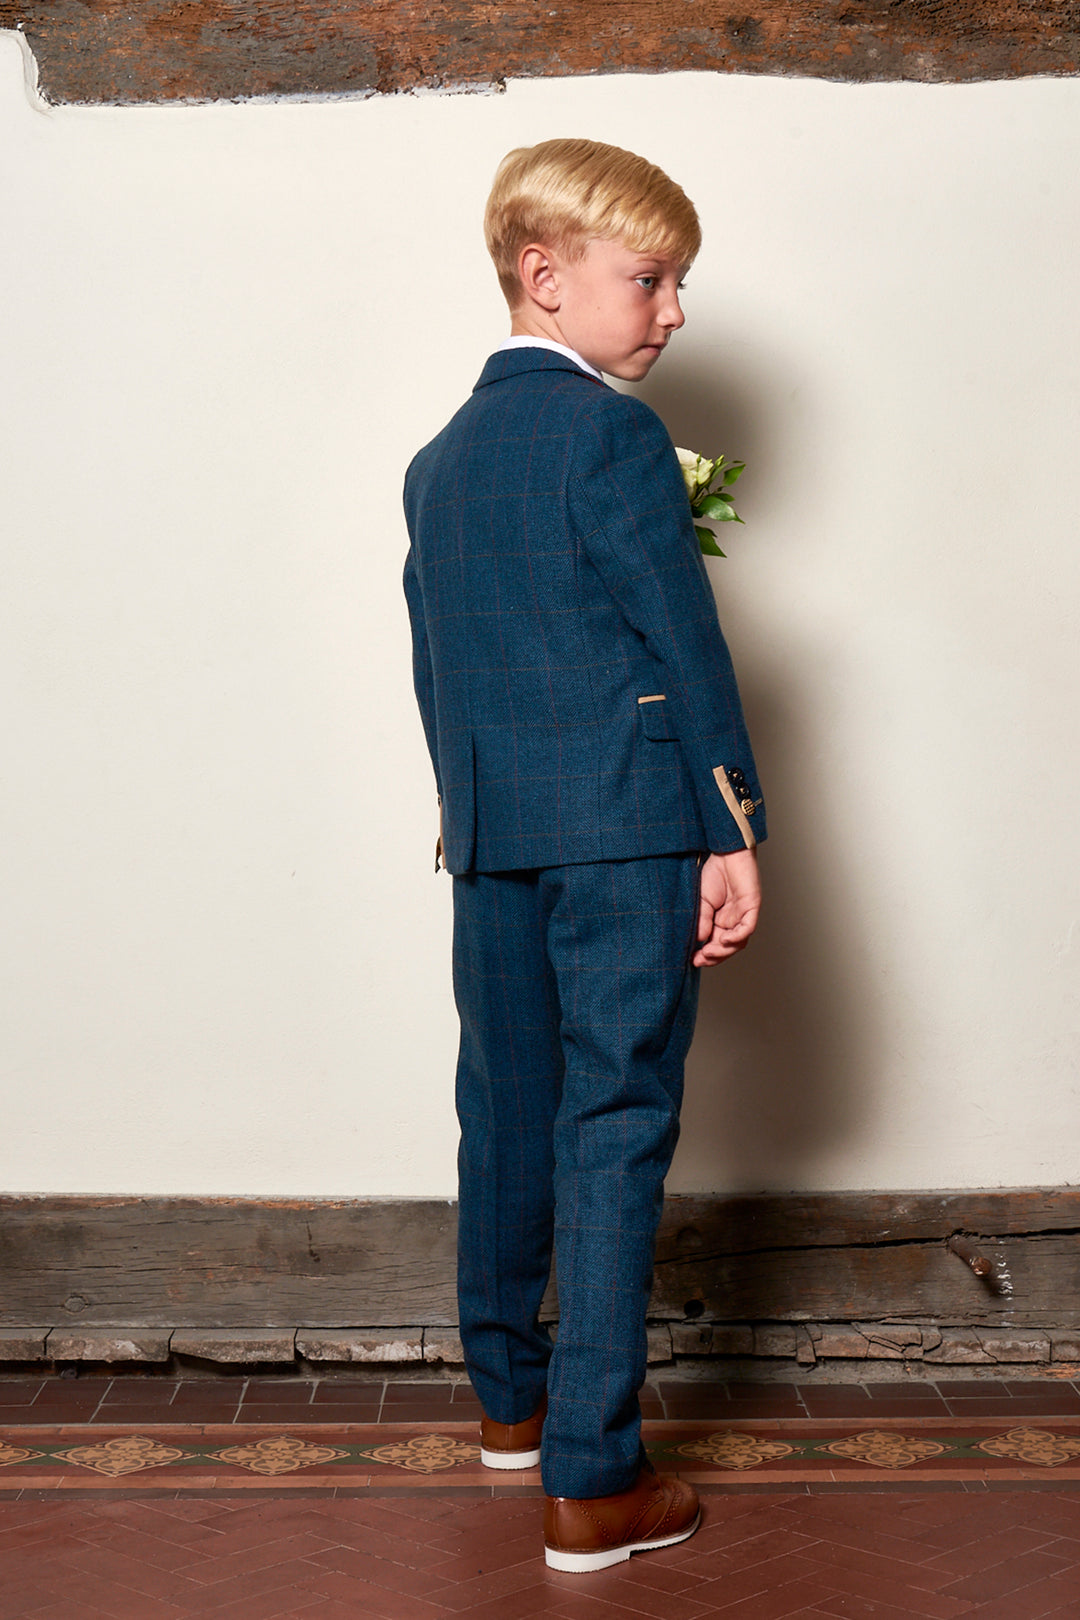 Matching Father & Son | Men’s DION - Blue Tweed Check Suit